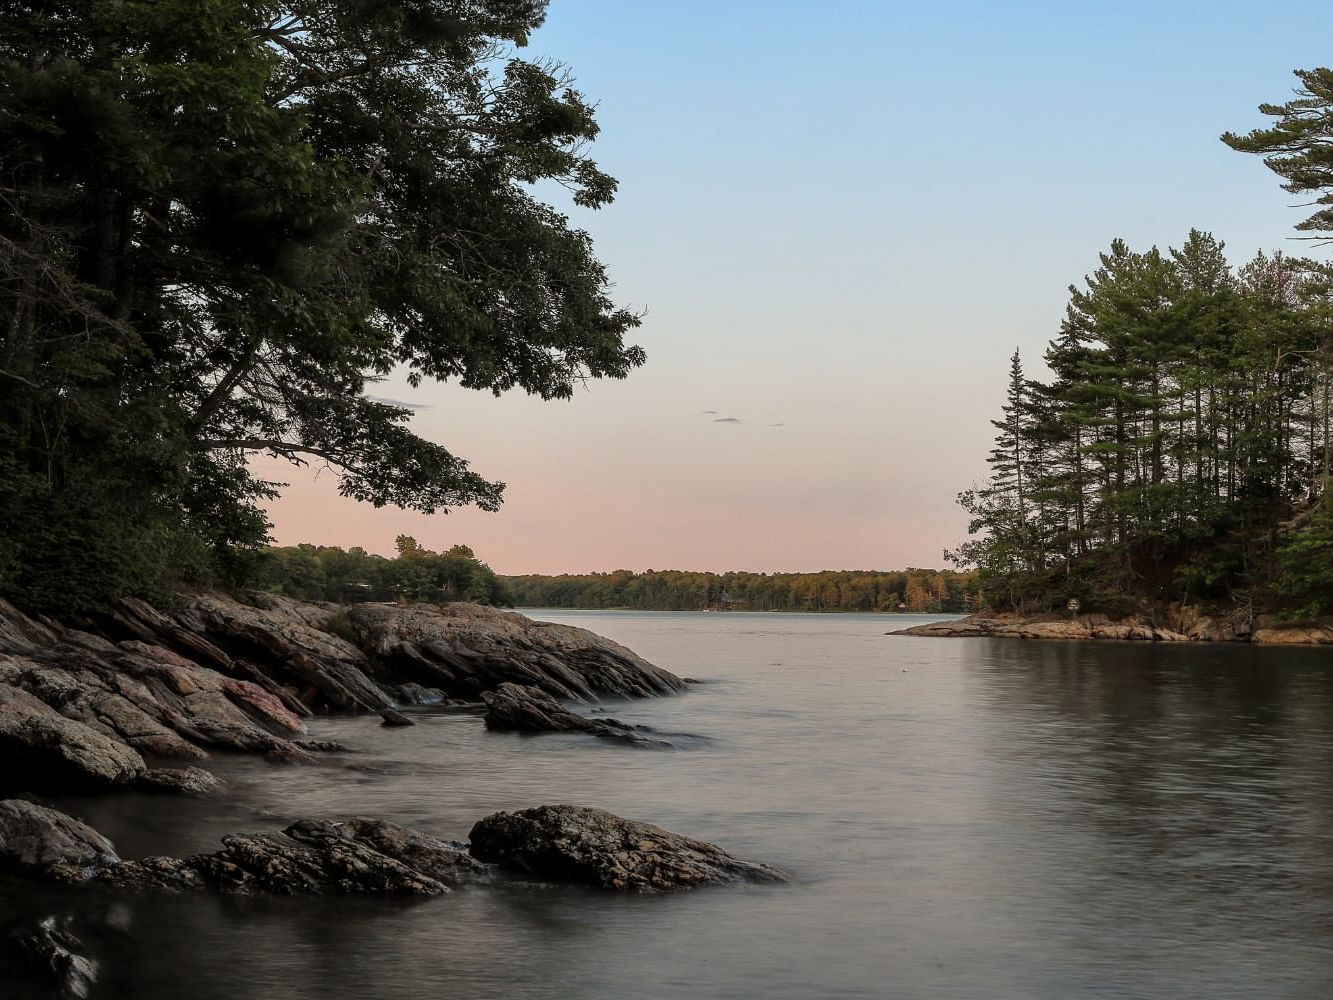 View of the evening skyline from river in Wolfe's Neck Woods State Park near Ogunquit Collection